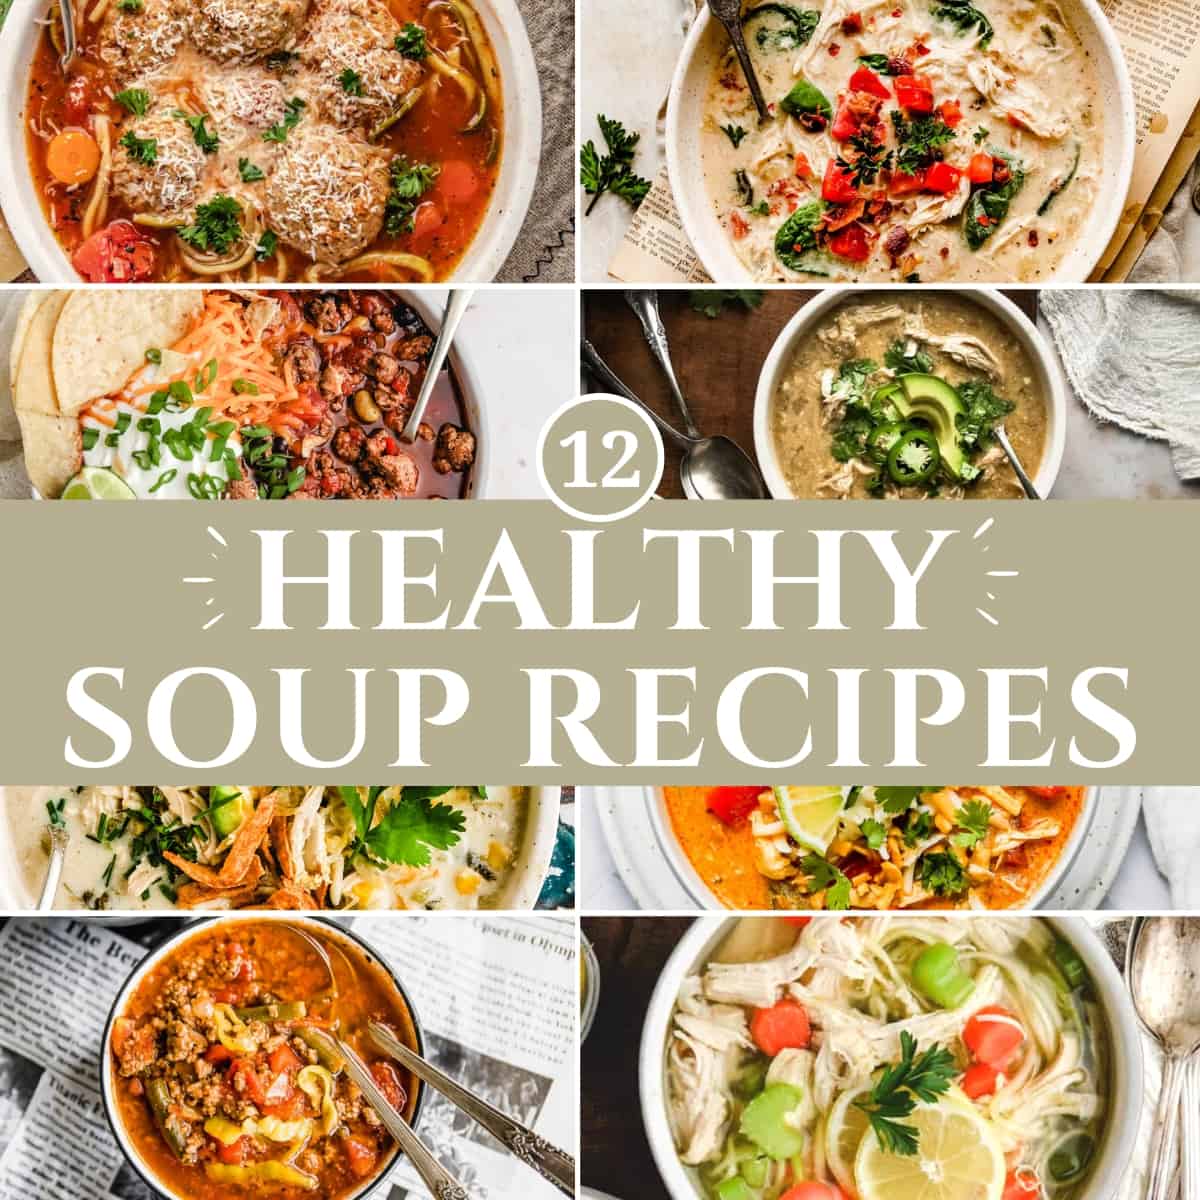 Top 12 Healthy Soup Recipes | Healthy Little Peach